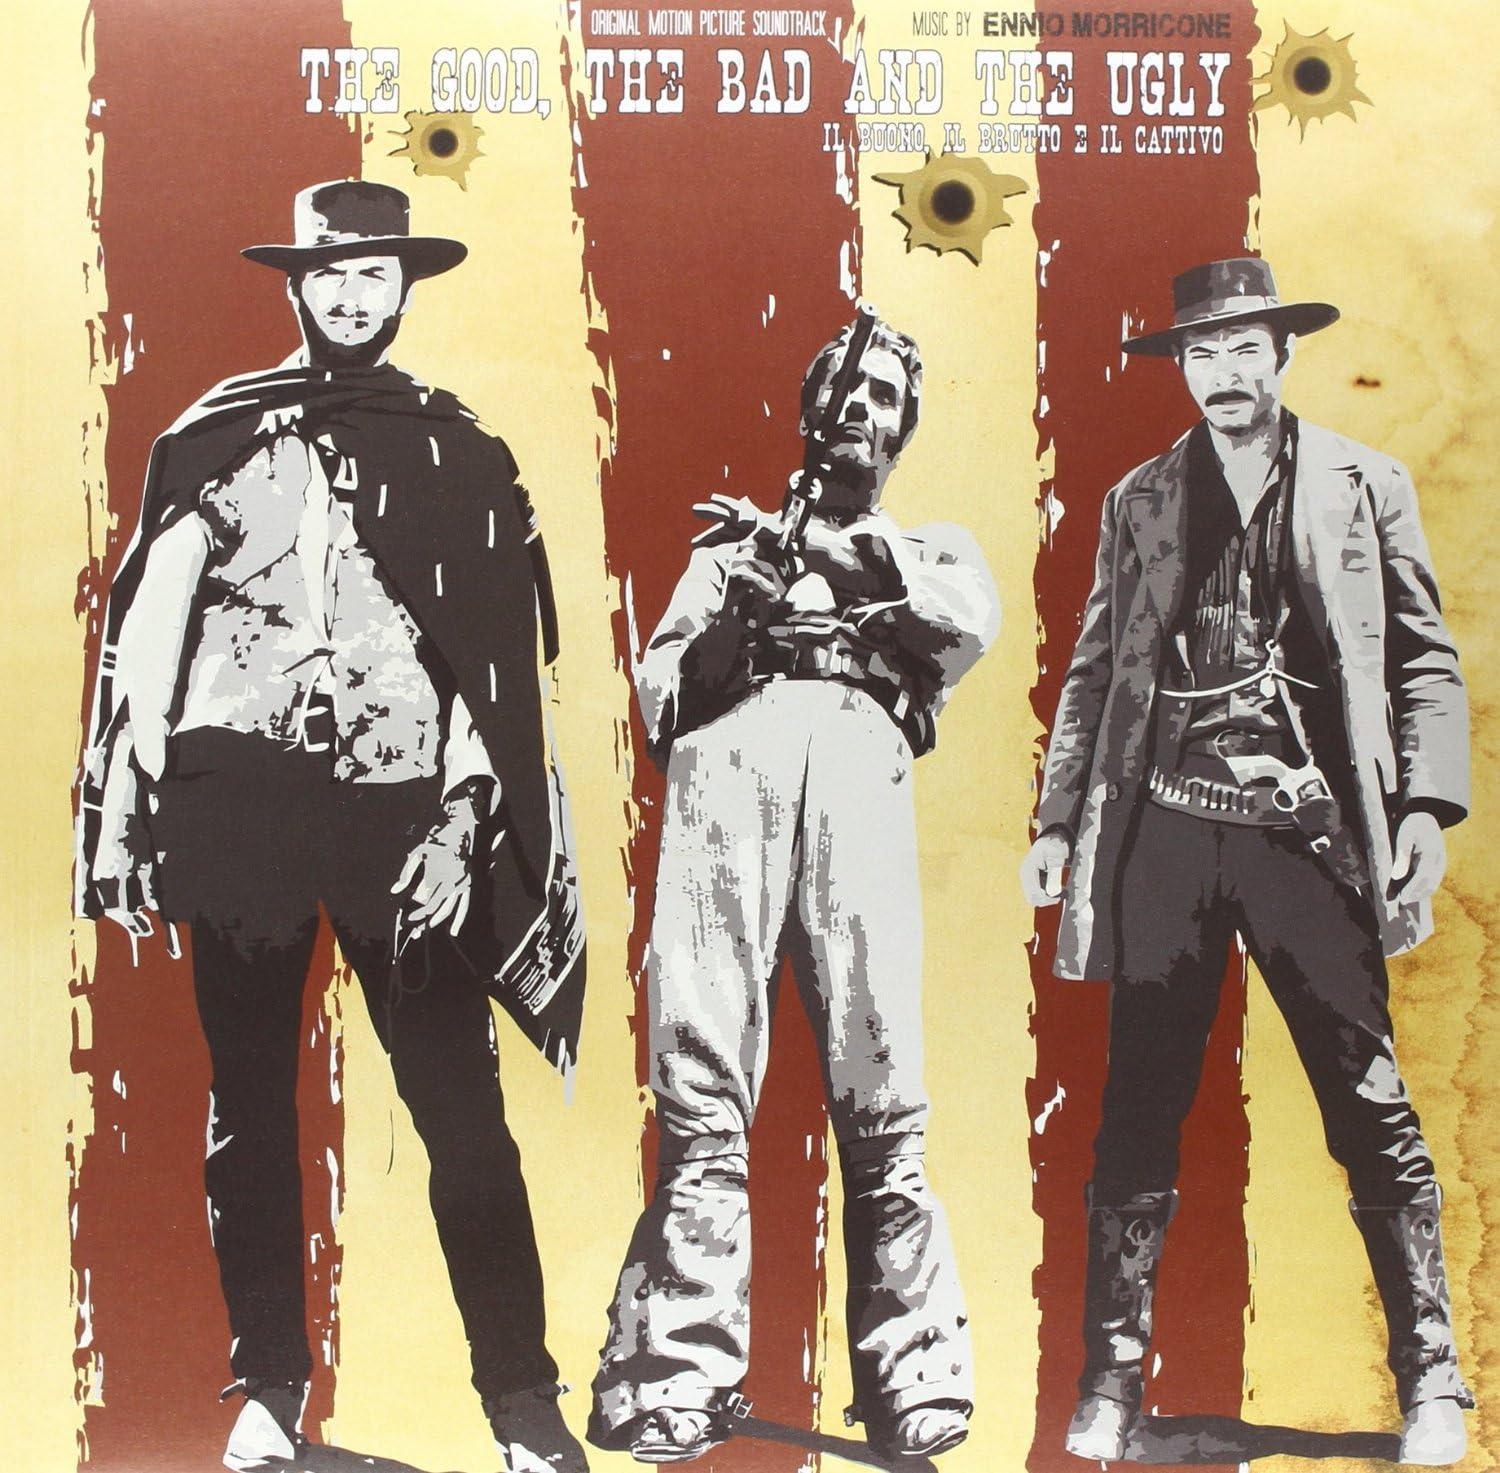 The Good, The Bad The Ugly (Original Motion Picture Soundtrack) (Vinyl LP)